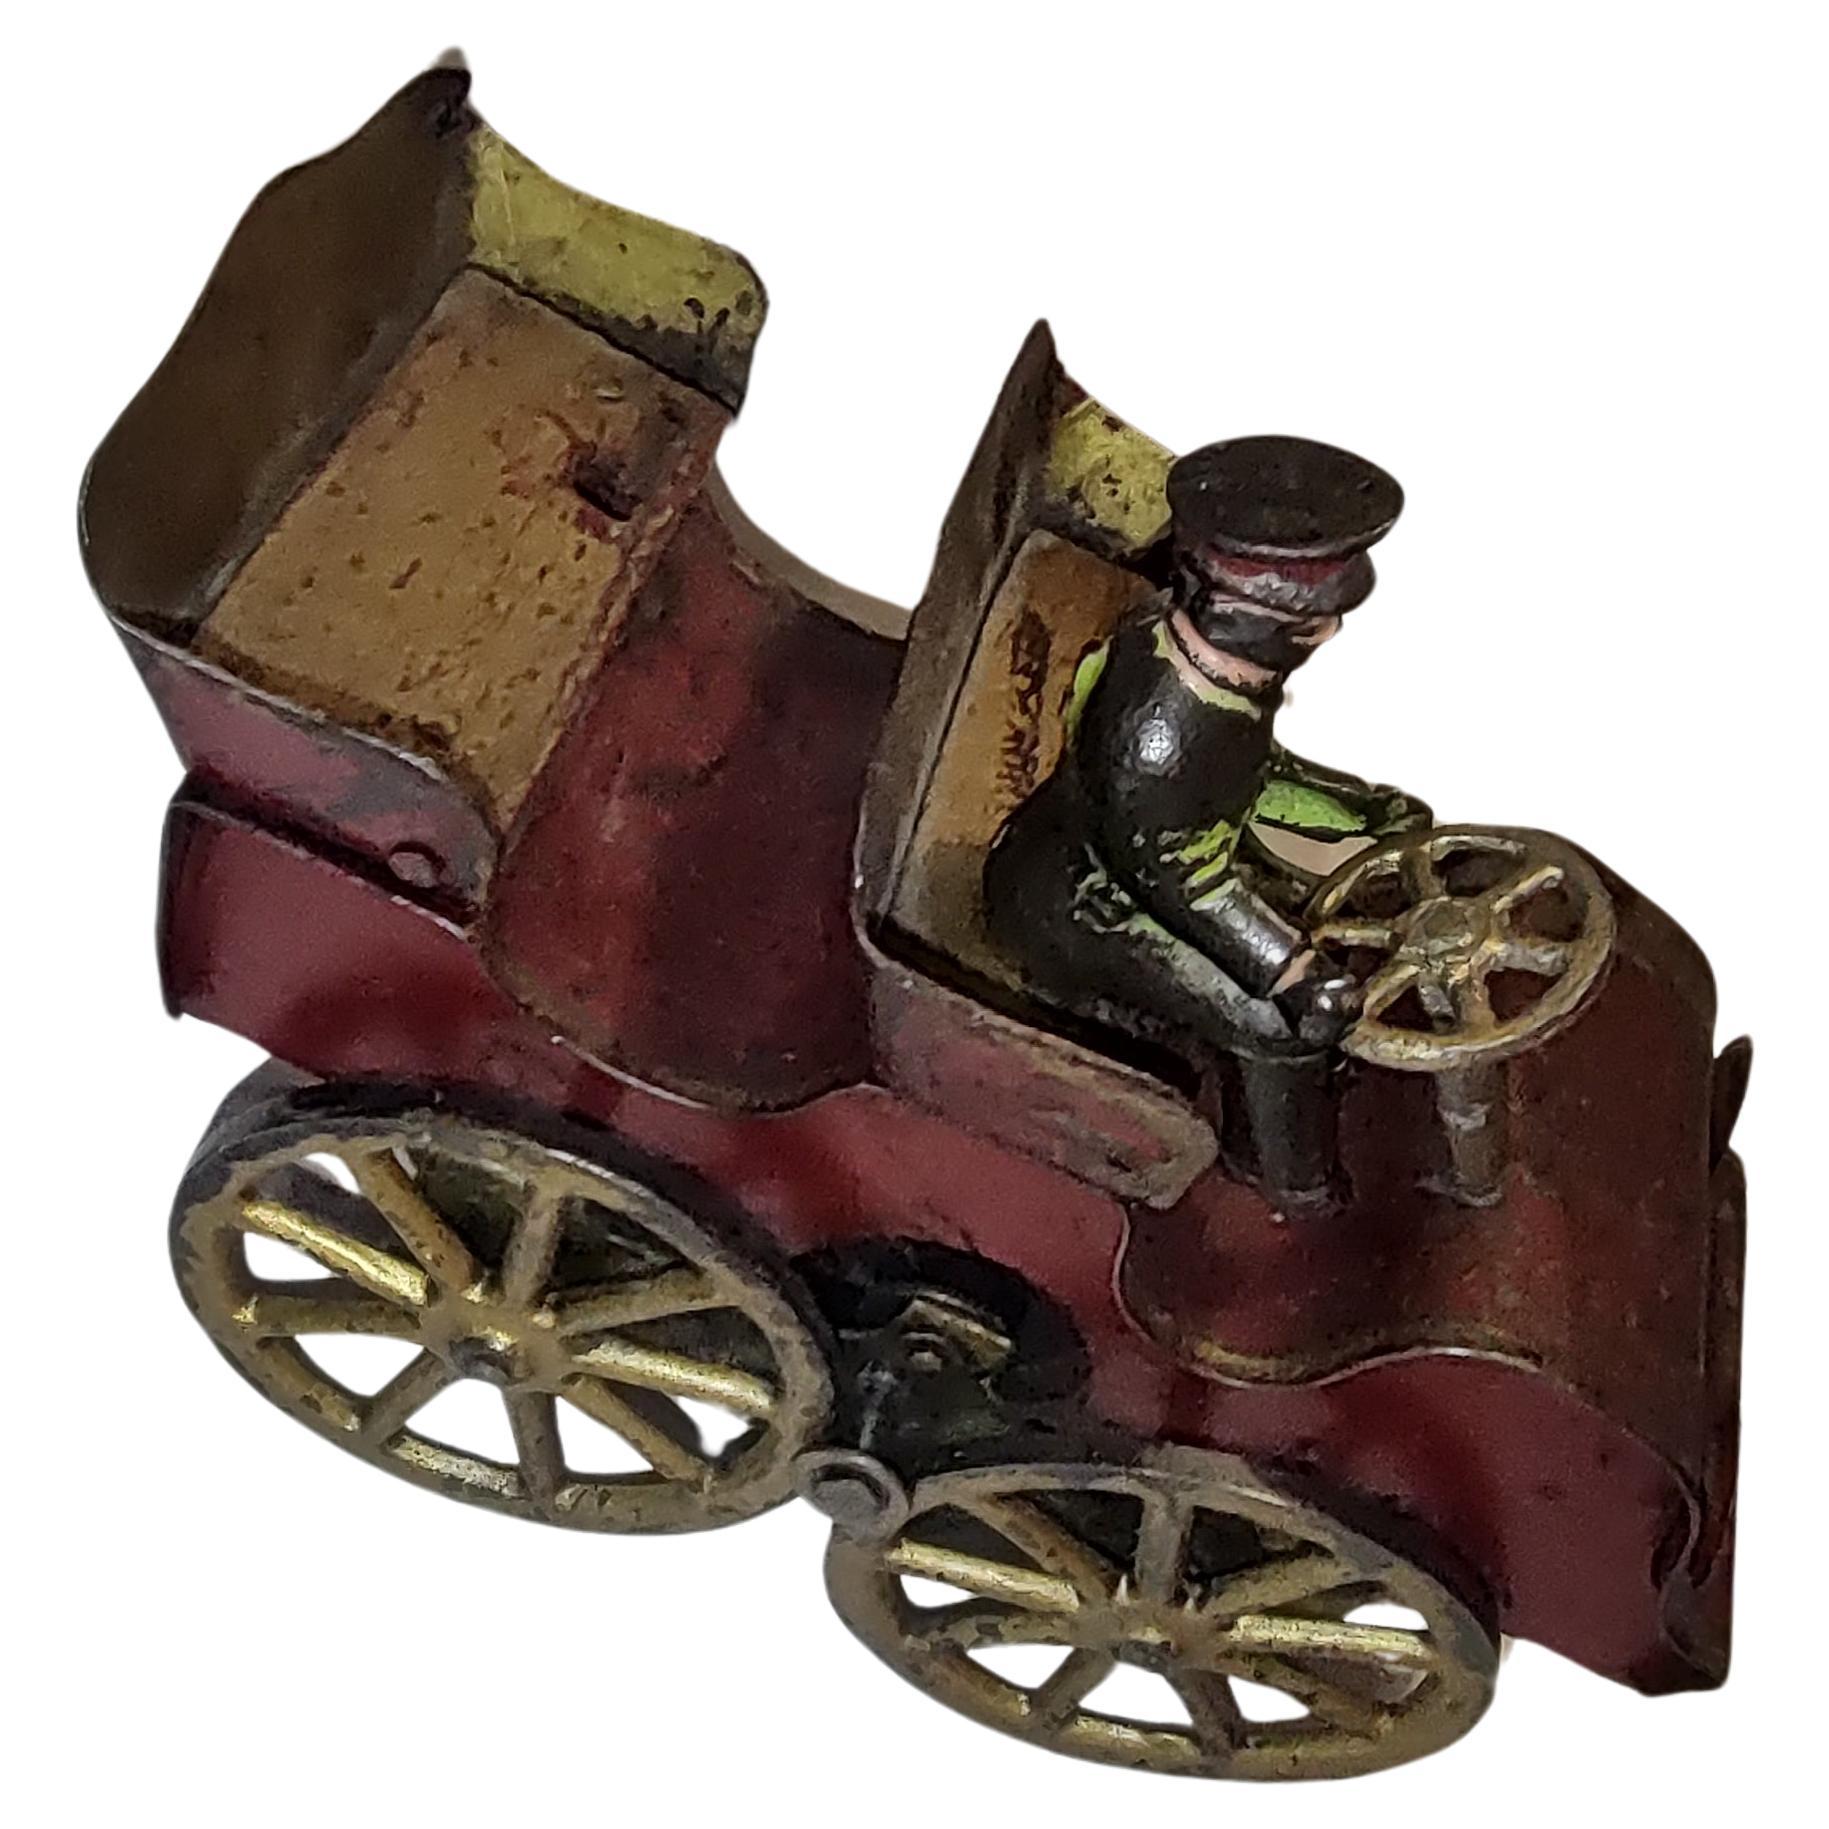 Fabulous early toy example by the Clark co. This hill climber works great, and is almost totally complete. It's missing it's passenger in the back. Cast iron chauffeur looks to be original. Created from wood & tin with some cast iron. In excellent